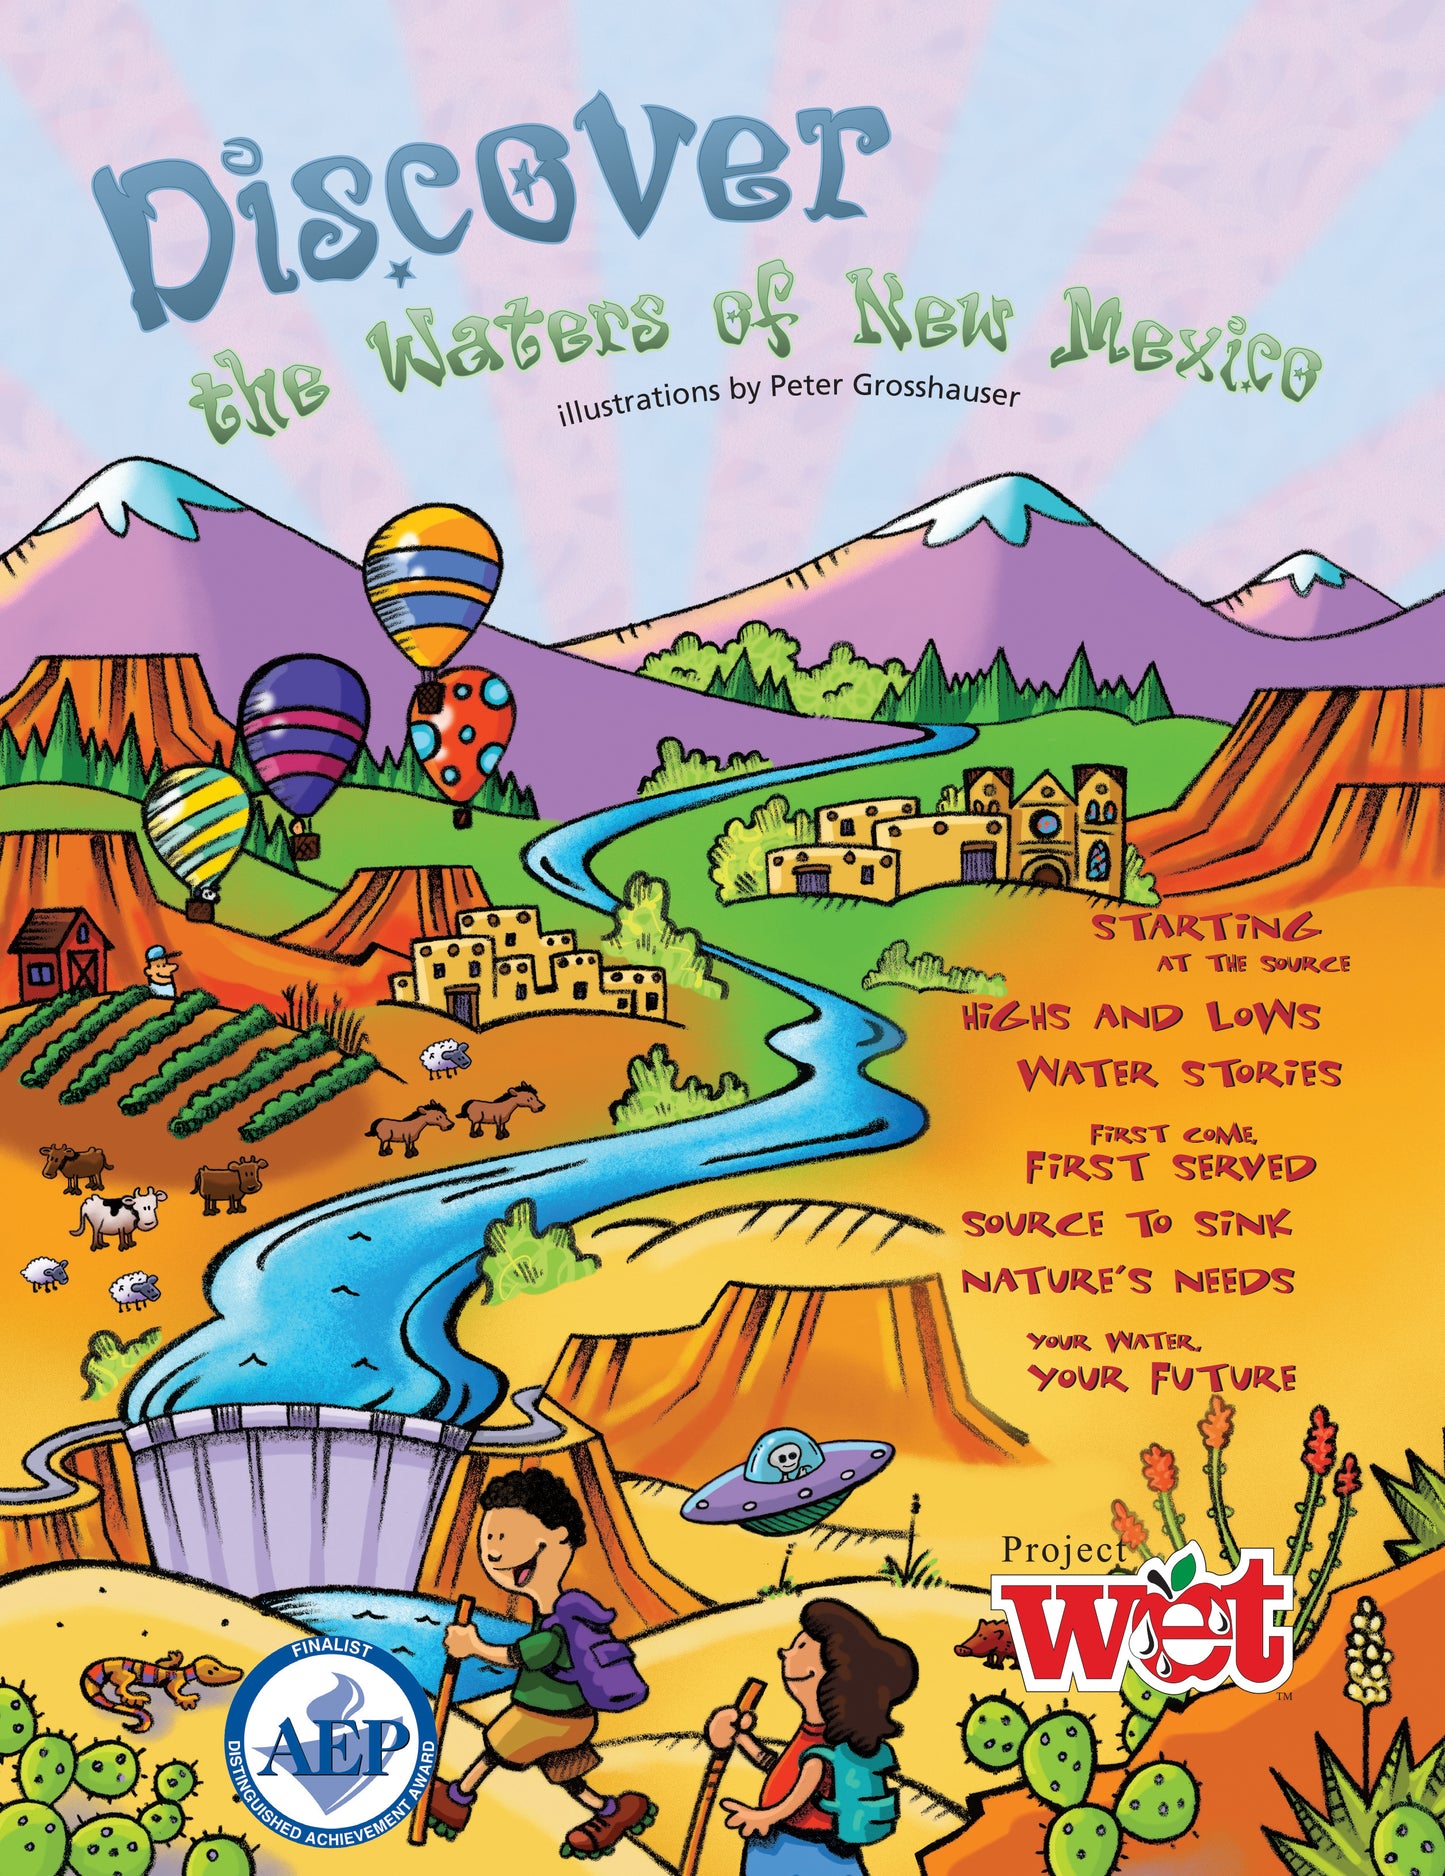 Discover the Waters of New Mexico KIDs Activity Booklet